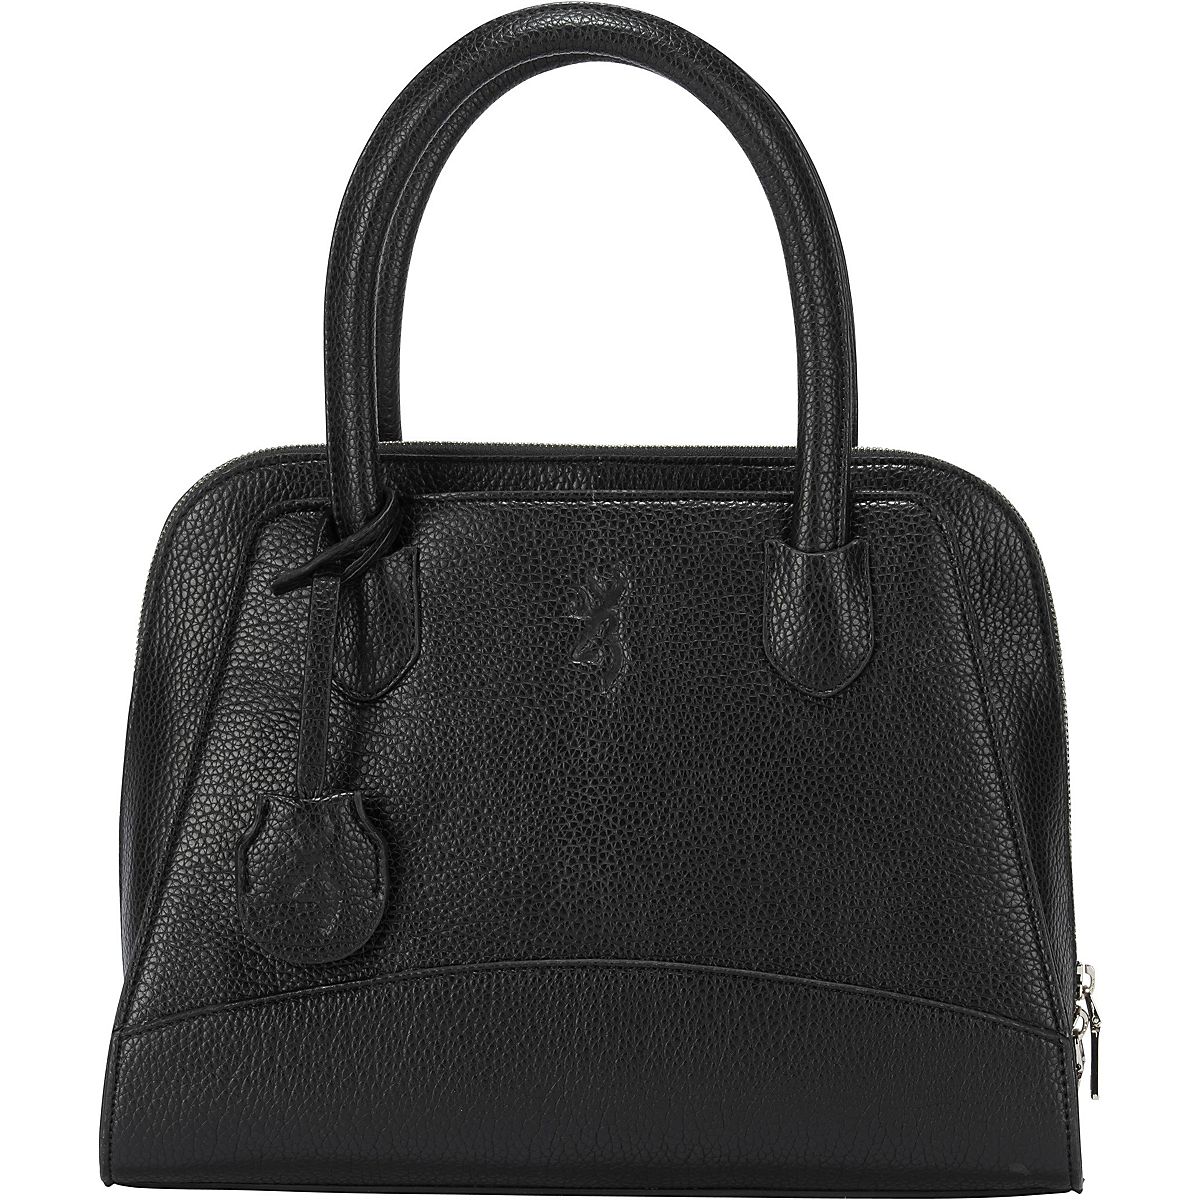 Browning Hazel Concealed Carry Handbag | Free Shipping at Academy